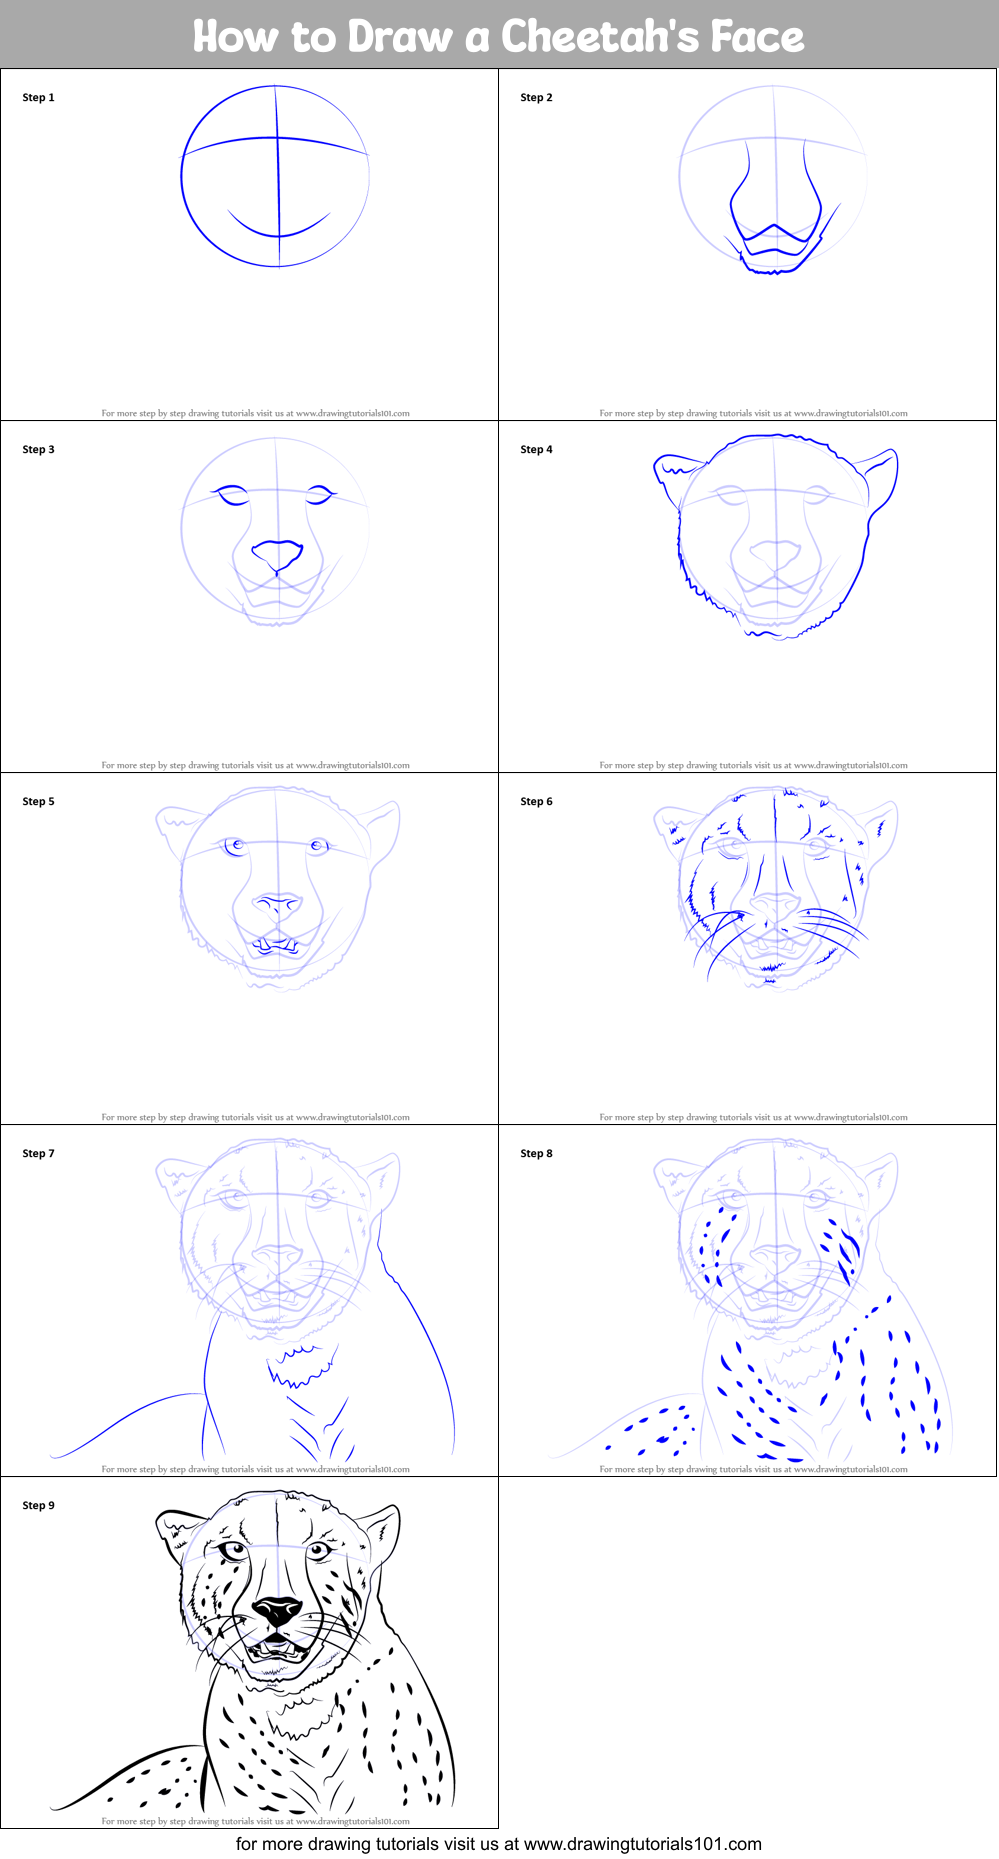 How to Draw a Cheetah's Face printable step by step